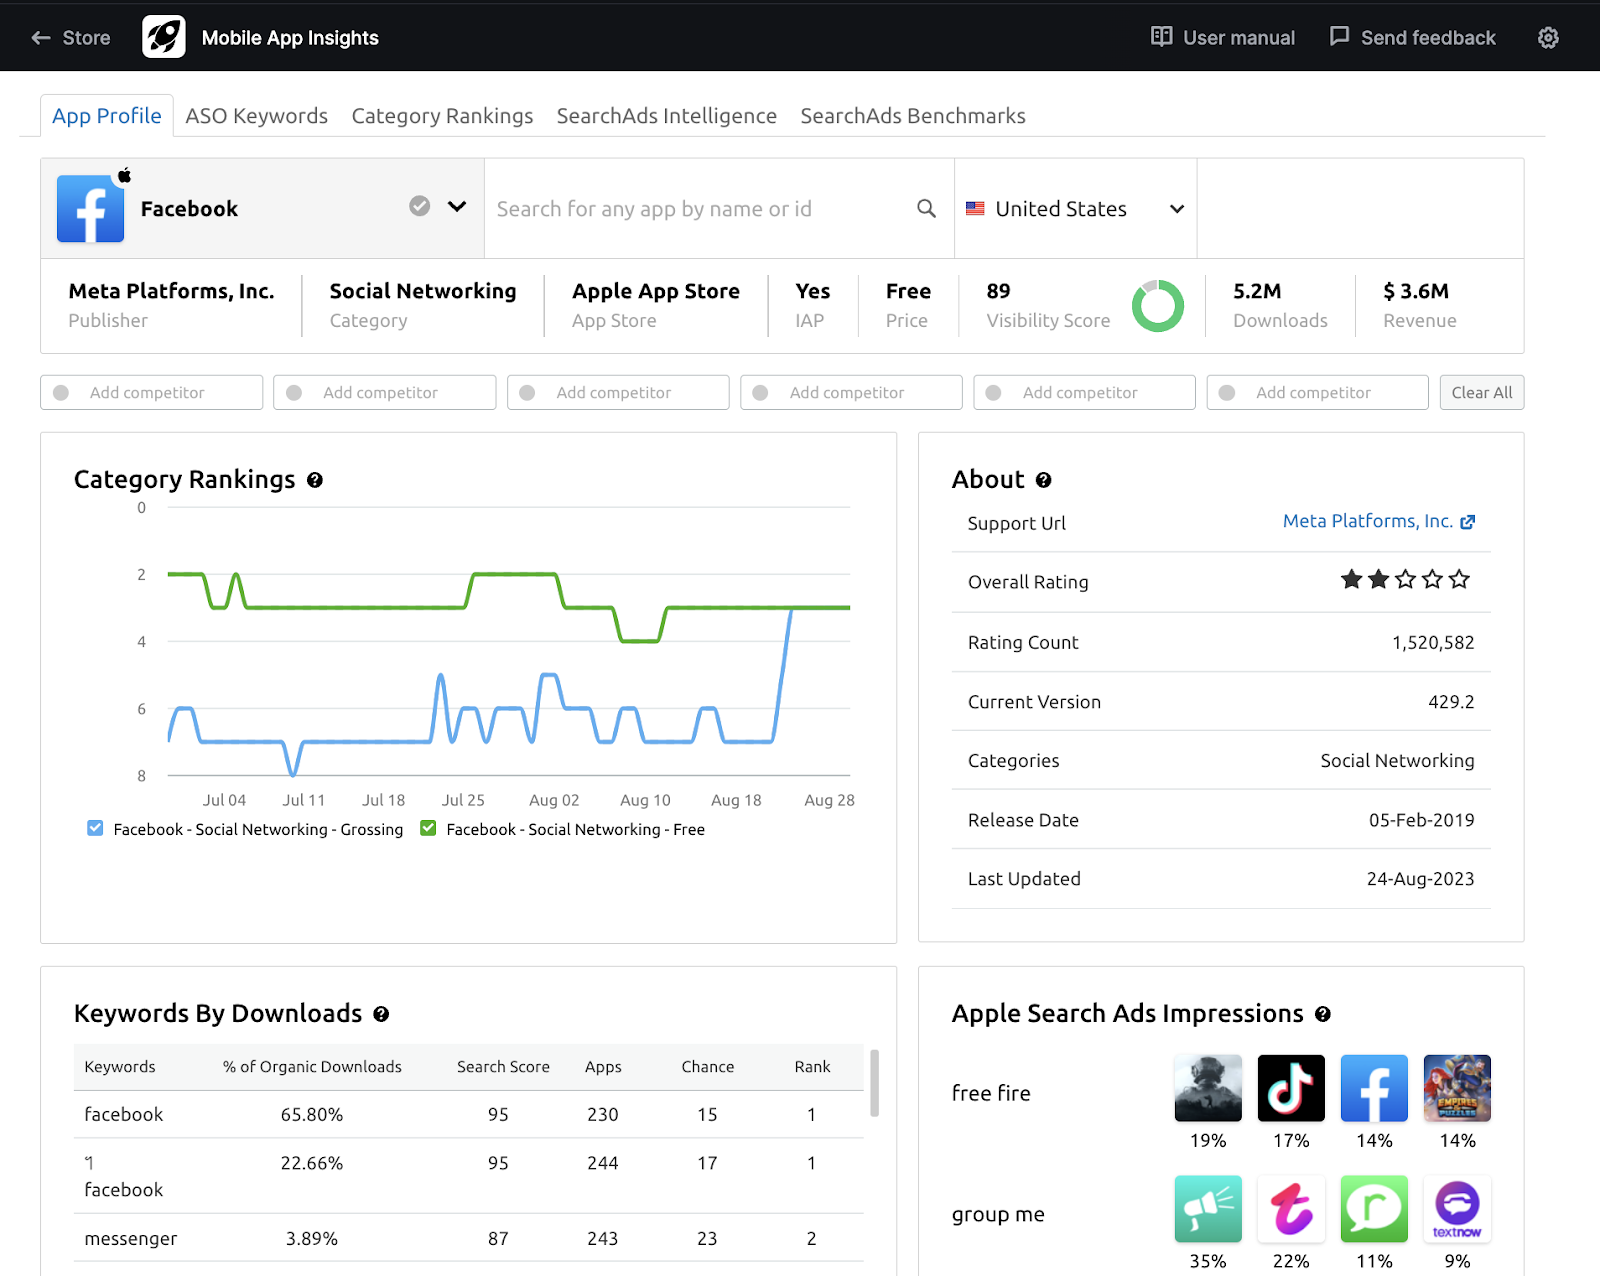 Overview of the Mobile App Insights app